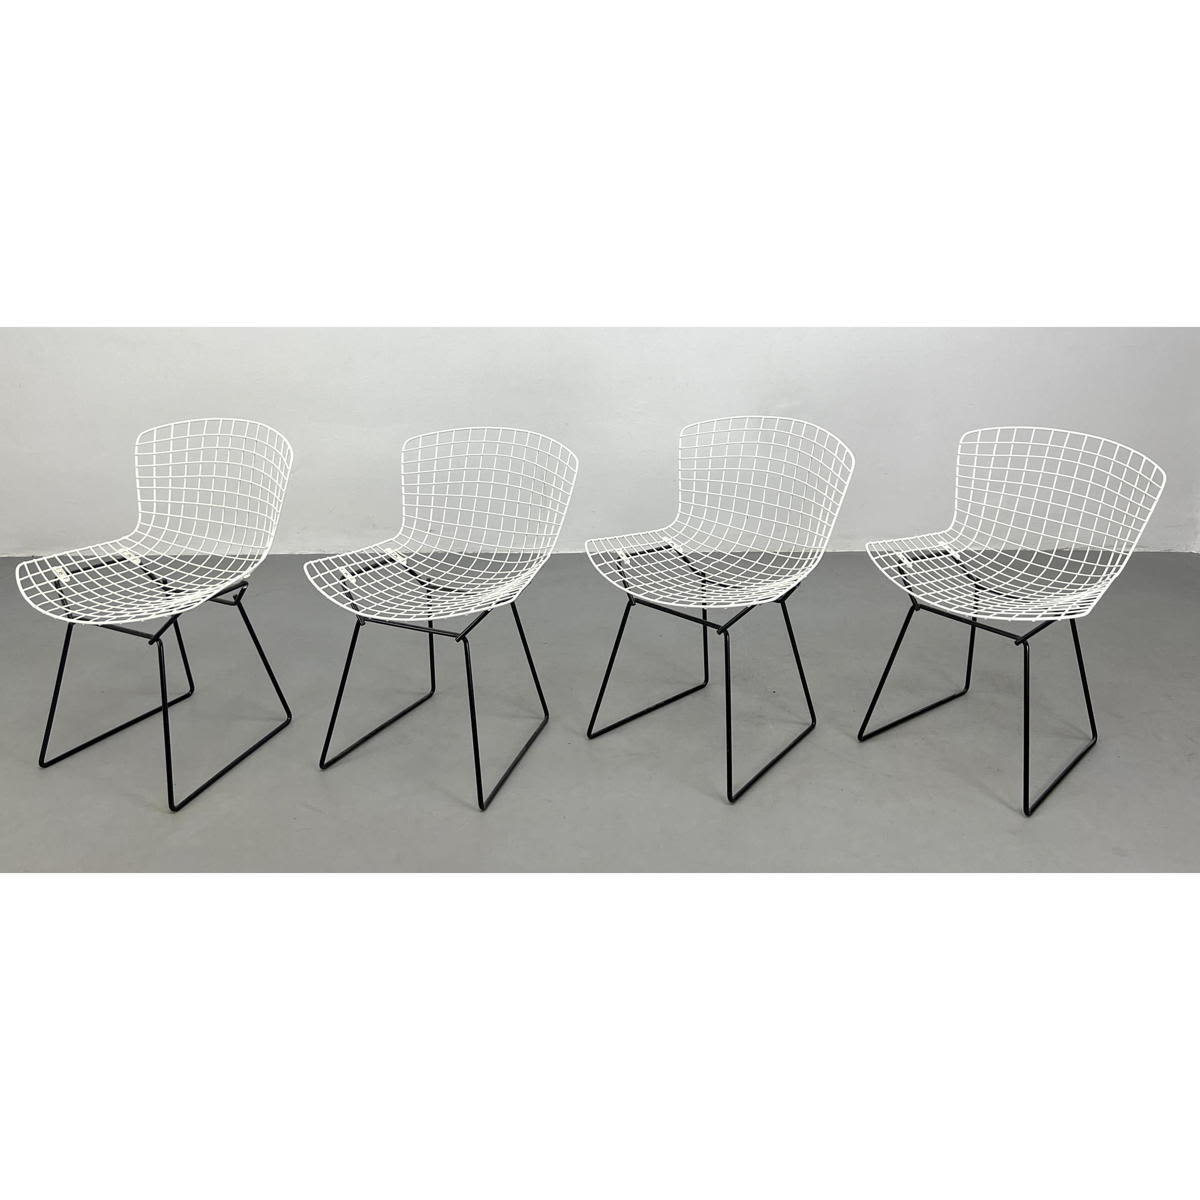 4 vintage Knoll Bertoia wire chairs.